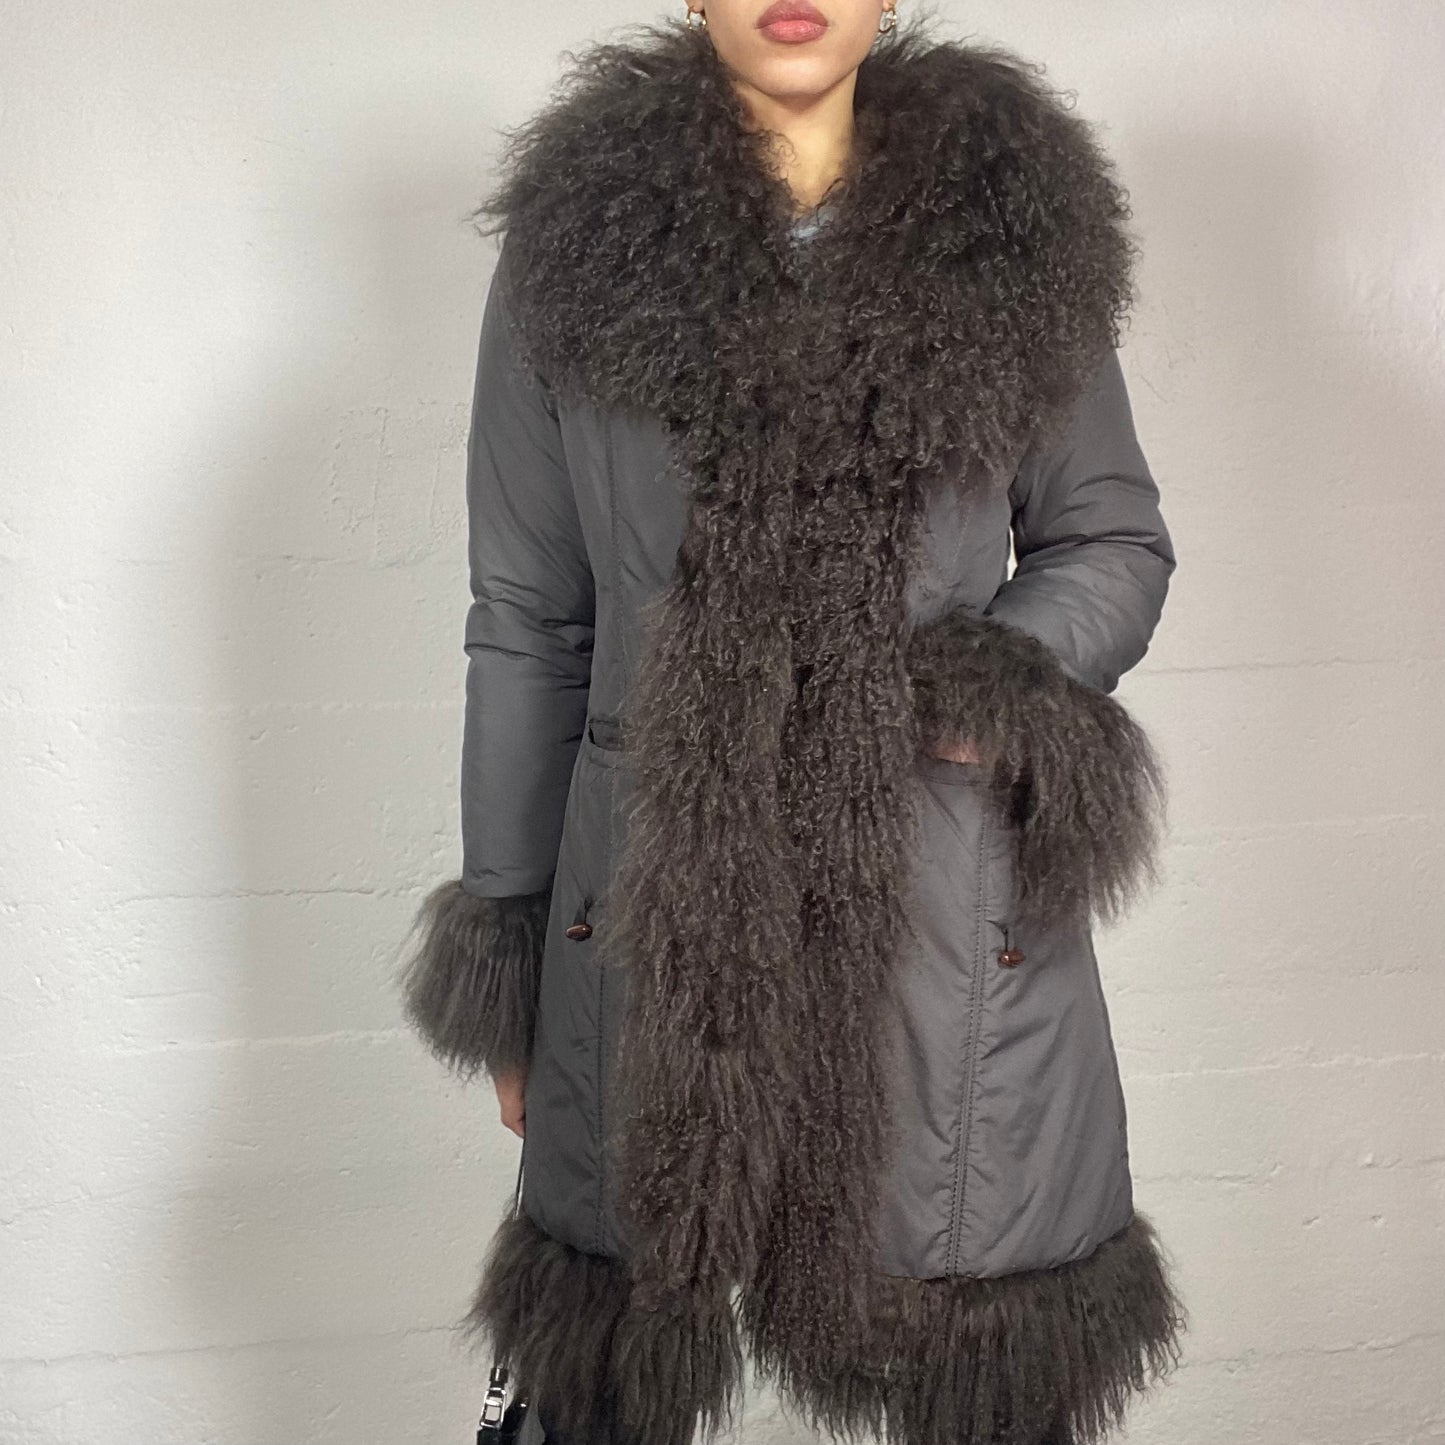 Vintage 90's Mob Wife Brown Long Jacket with Big Fluffy Sleeves and Neck Detail (M)